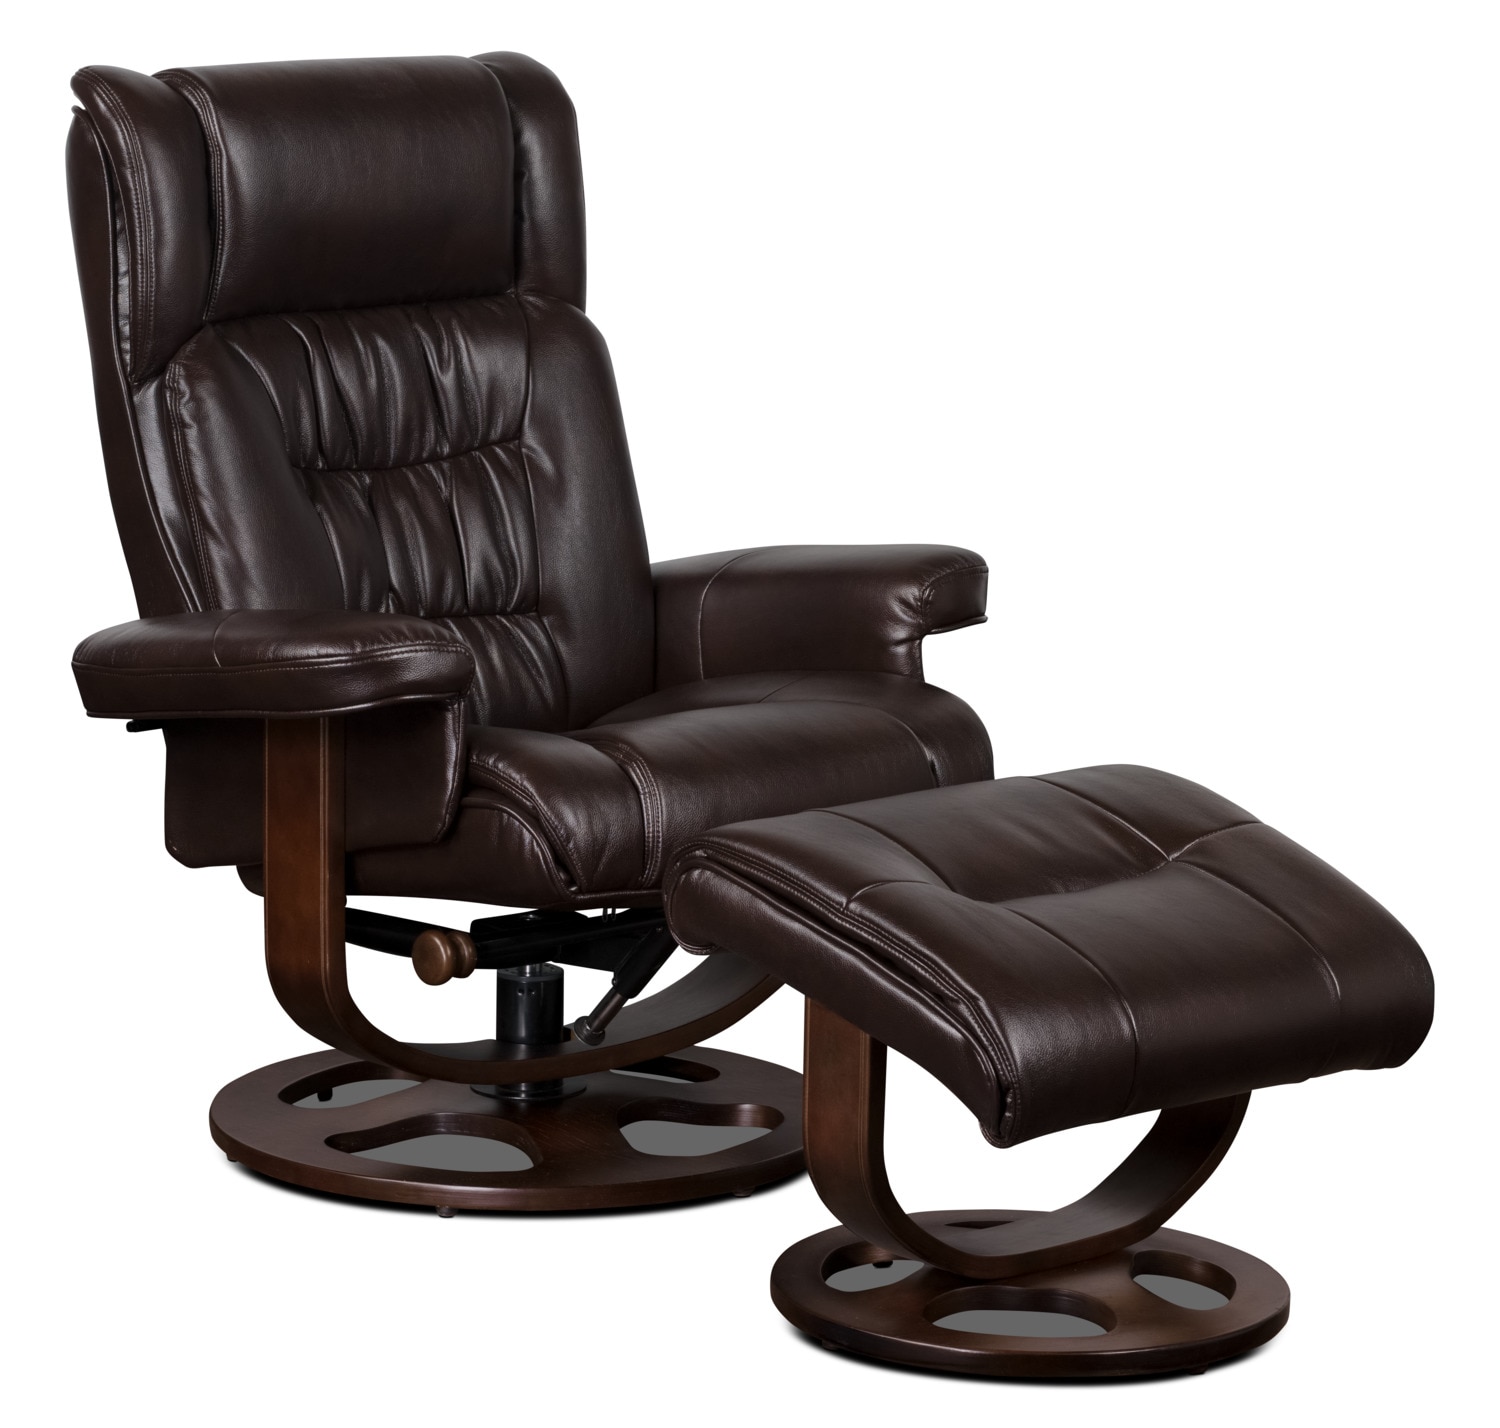 Benji Leather-Look Fabric Swivel Reclining Chair with ...